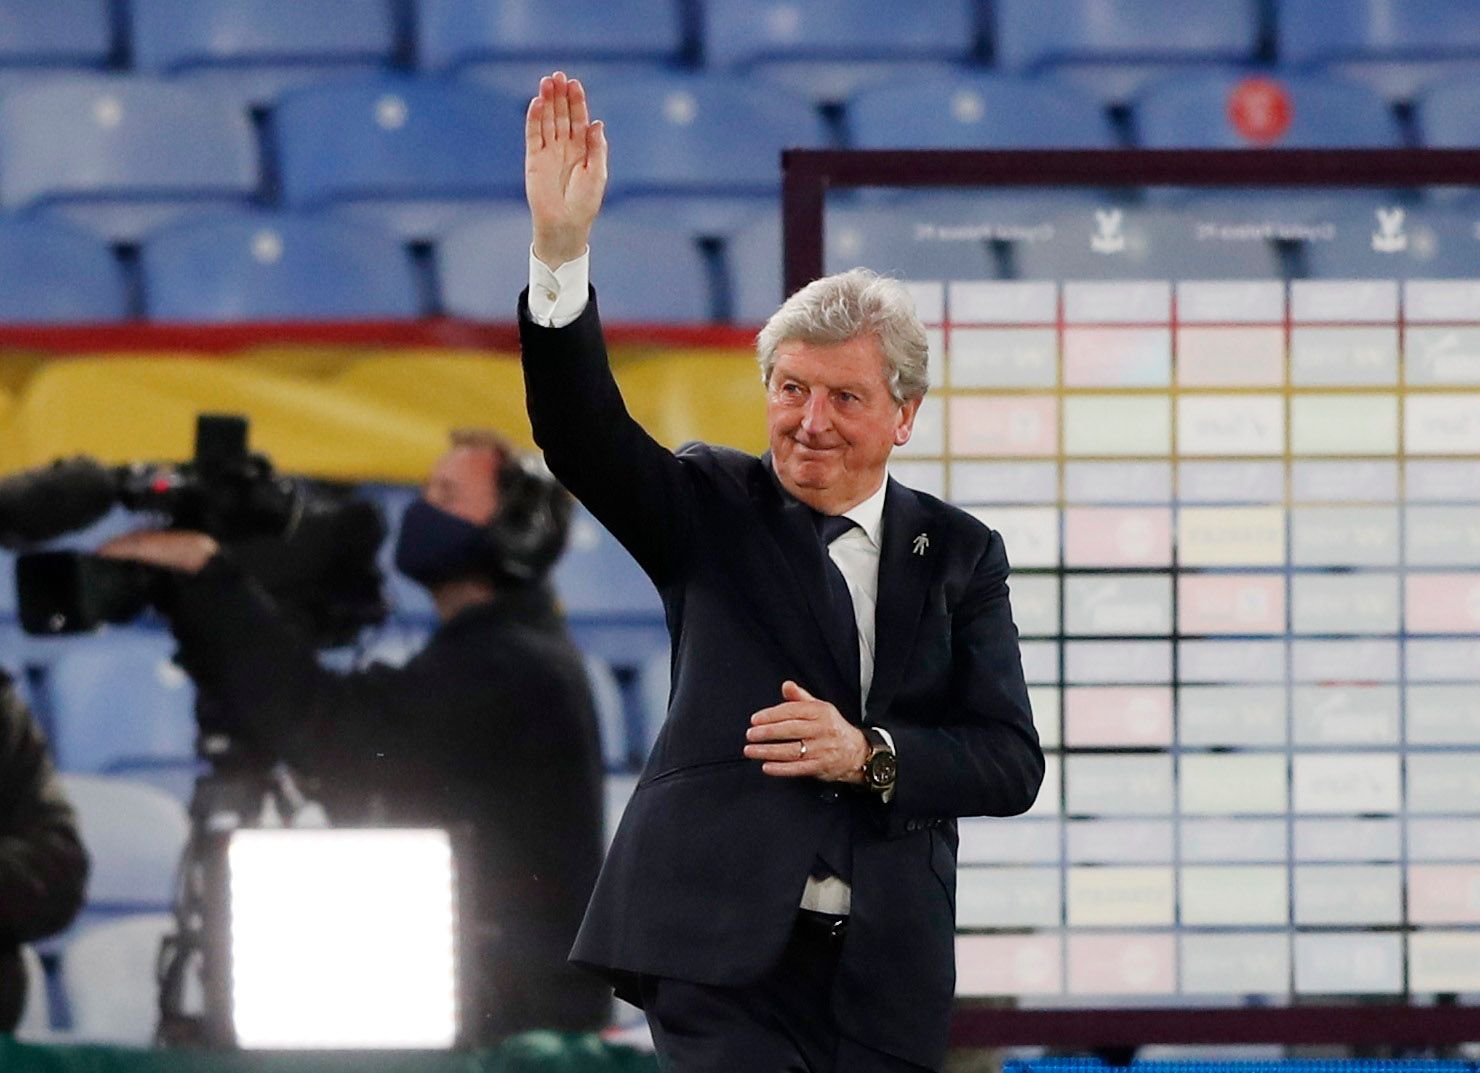 Soccer Football - Premier League - Crystal Palace v Arsenal - Selhurst Park, London, Britain - May 19, 2021 Crystal Palace manager Roy Hodgson waves to fans during a lap of appreciation after the match Pool via REUTERS/Frank Augstein EDITORIAL USE ONLY. No use with unauthorized audio, video, data, fixture lists, club/league logos or 'live' services. Online in-match use limited to 75 images, no video emulation. No use in betting, games or single club /league/player publications.  Please contact y